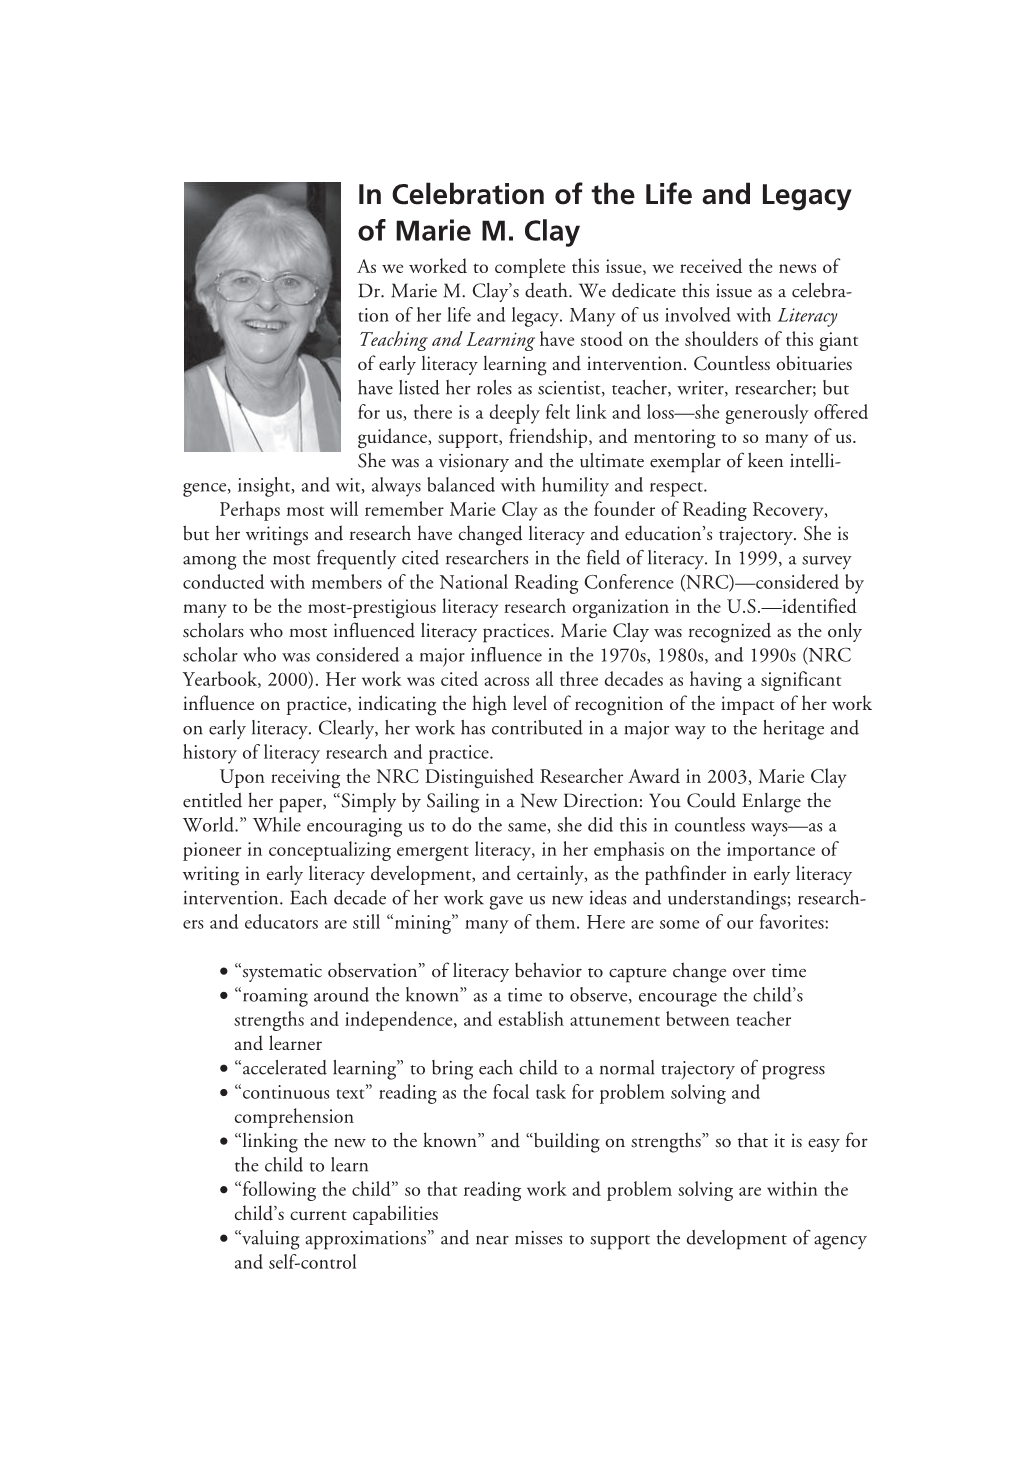 In Celebration of the Life and Legacy of Marie M. Clay As We Worked to Complete This Issue, We Received the News of Dr